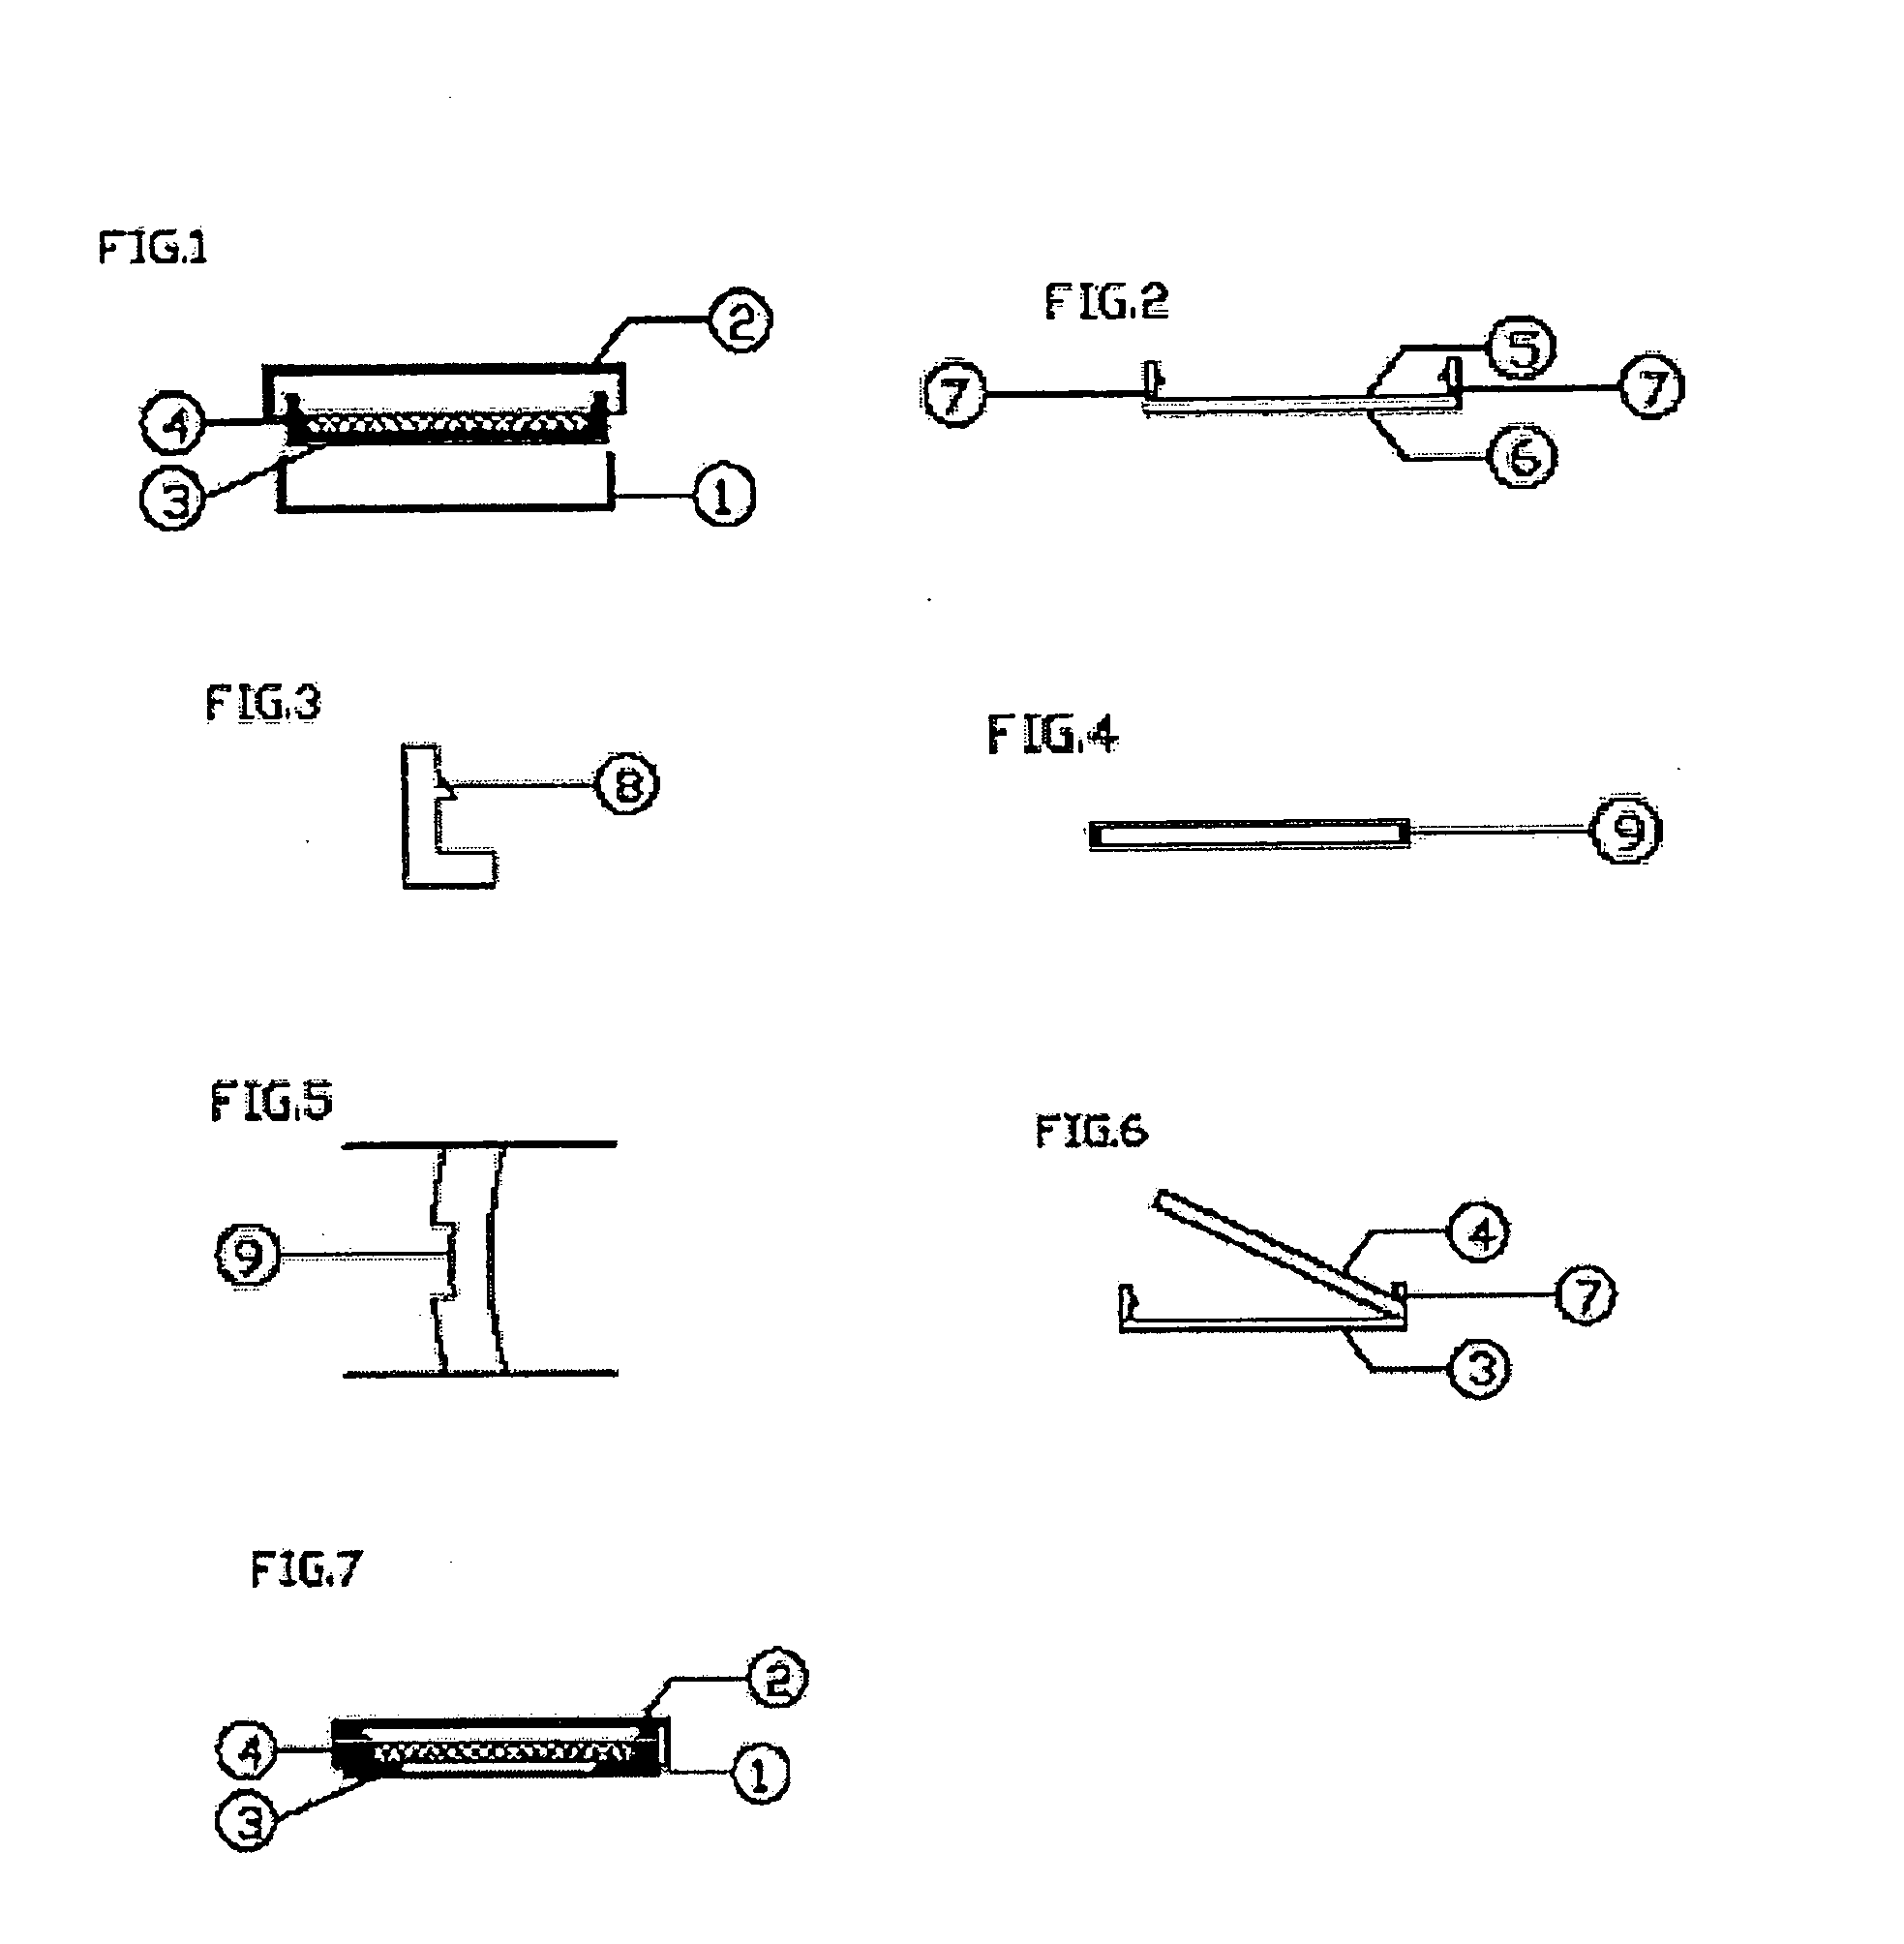 Insert device for culturing cells